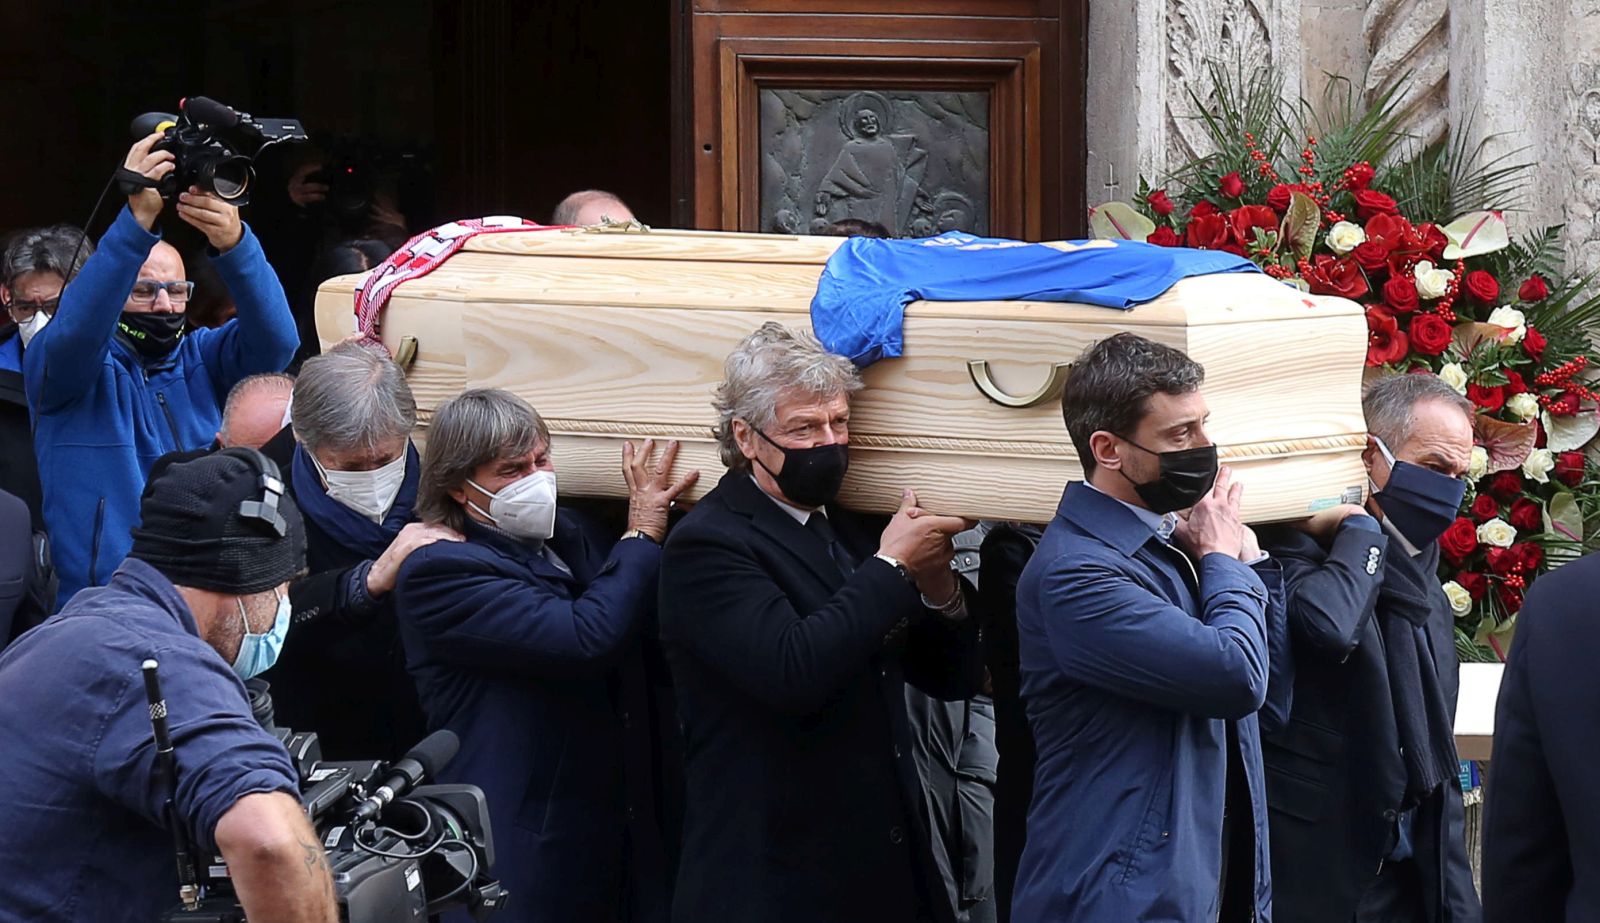 epa08878937 The coffin is carried out of the Santa Maria Annunciata Cathedral after the funeral mass for Paolo Rossi, in Vicenza, northeastern Italy, 12 December 2020. Former Italian soccer player Paolo Rossi, who led the national team to its 1982 World Cup victory, had died on 09 December 2020 in Siena at the age of 64.  EPA/NICOLA FOSSELLA